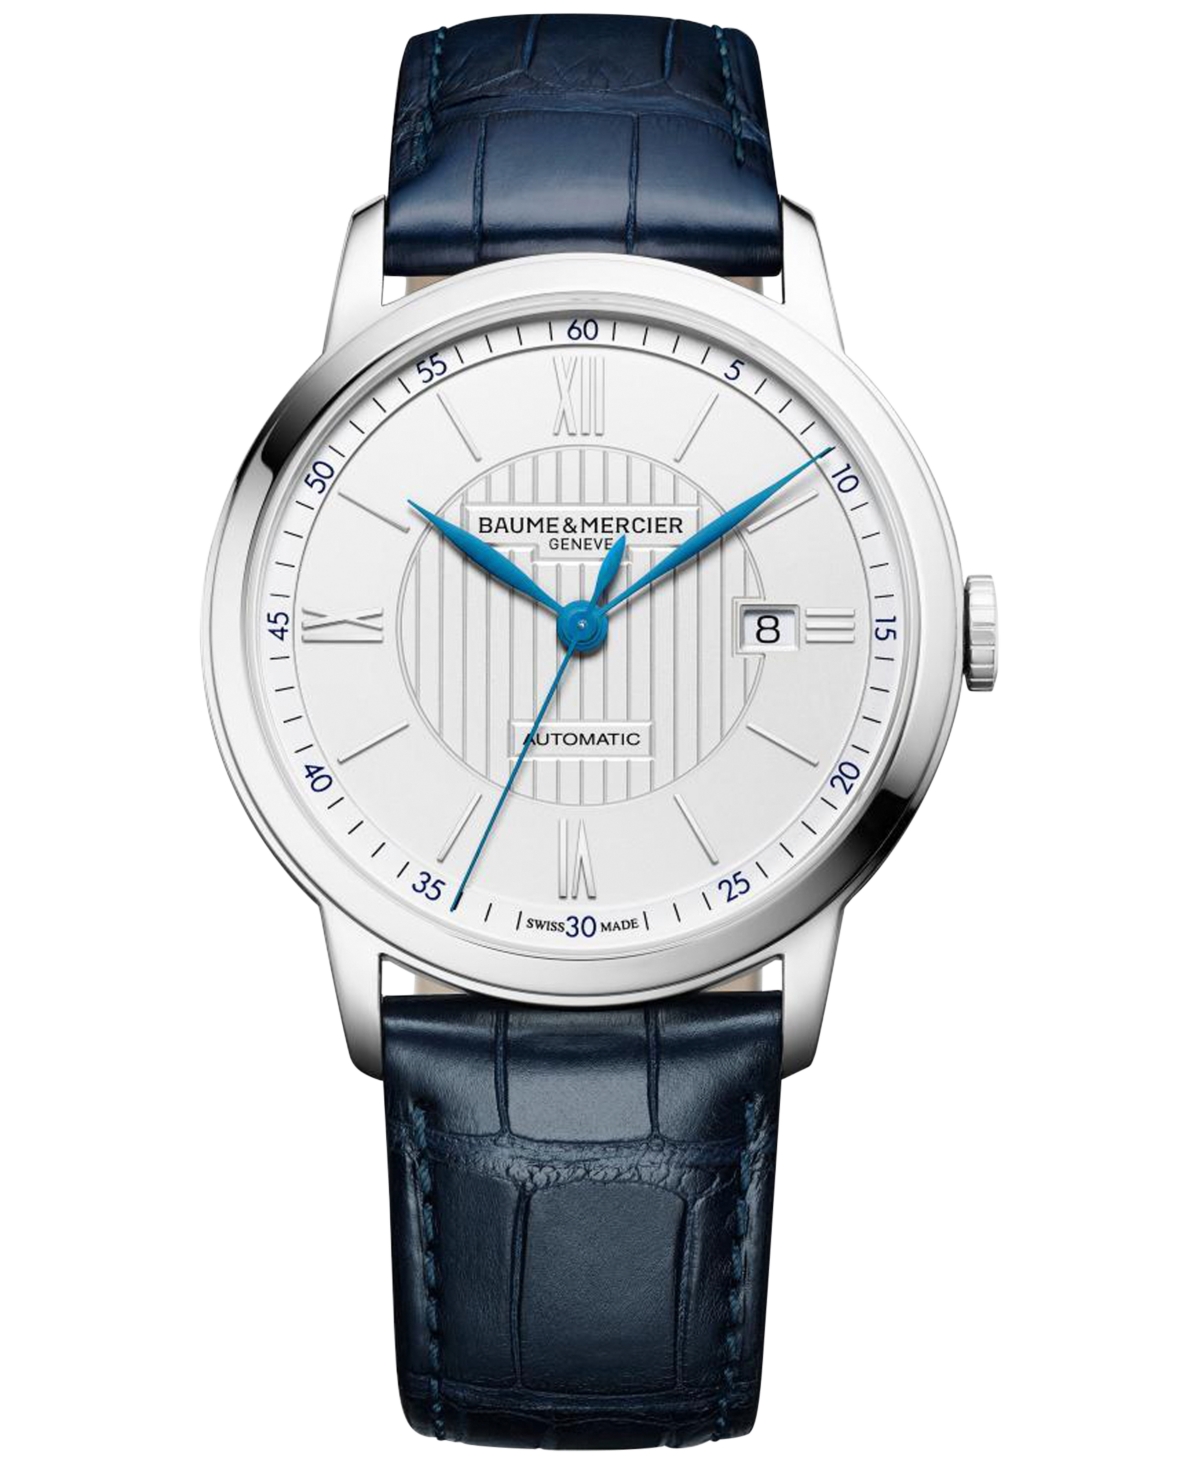 Baume & Mercier Men's Swiss Automatic Classima Navy Leather Strap Watch 42mm M0a10333